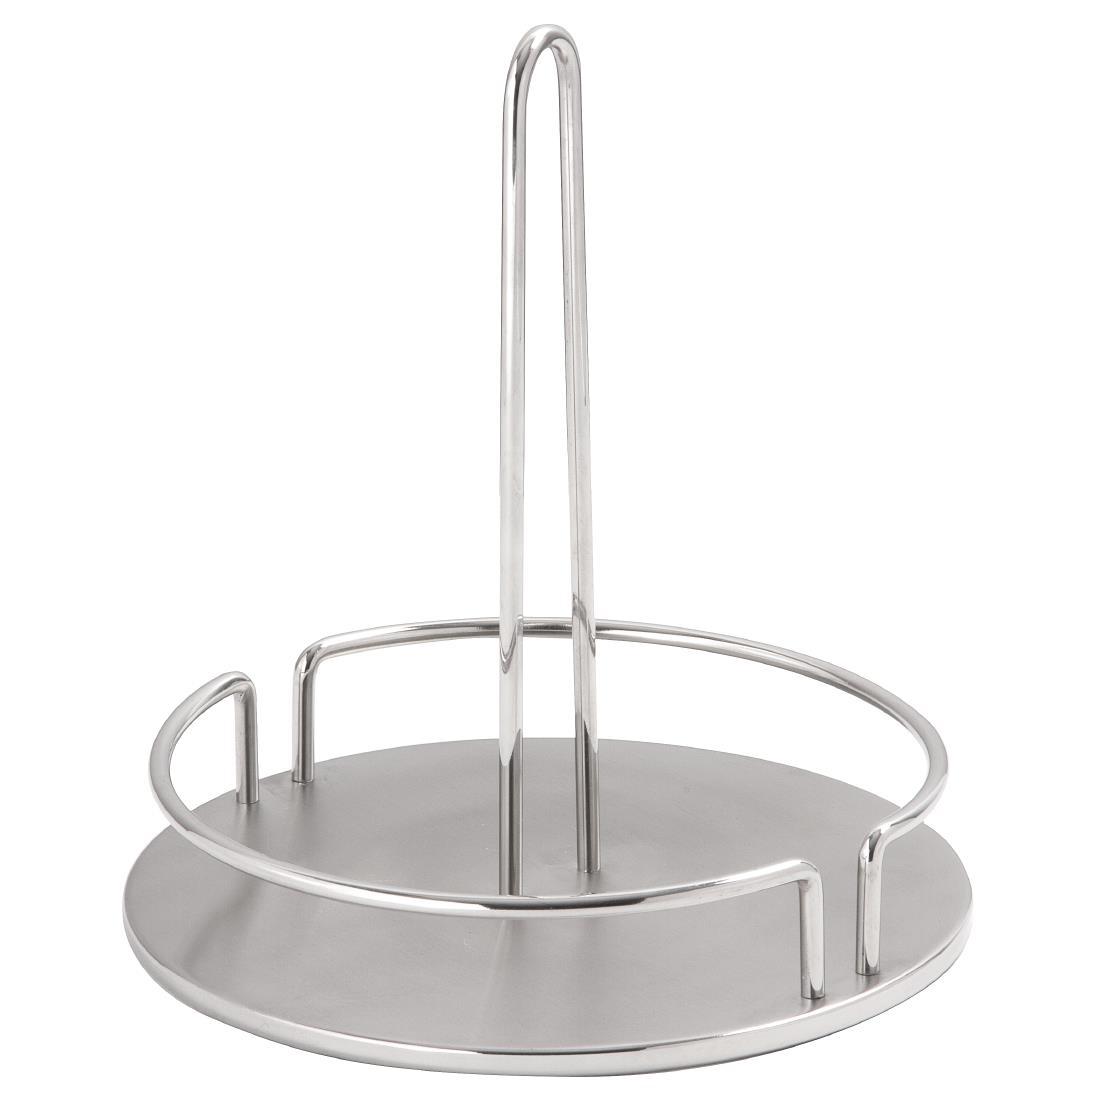 Serving Stand and Rack